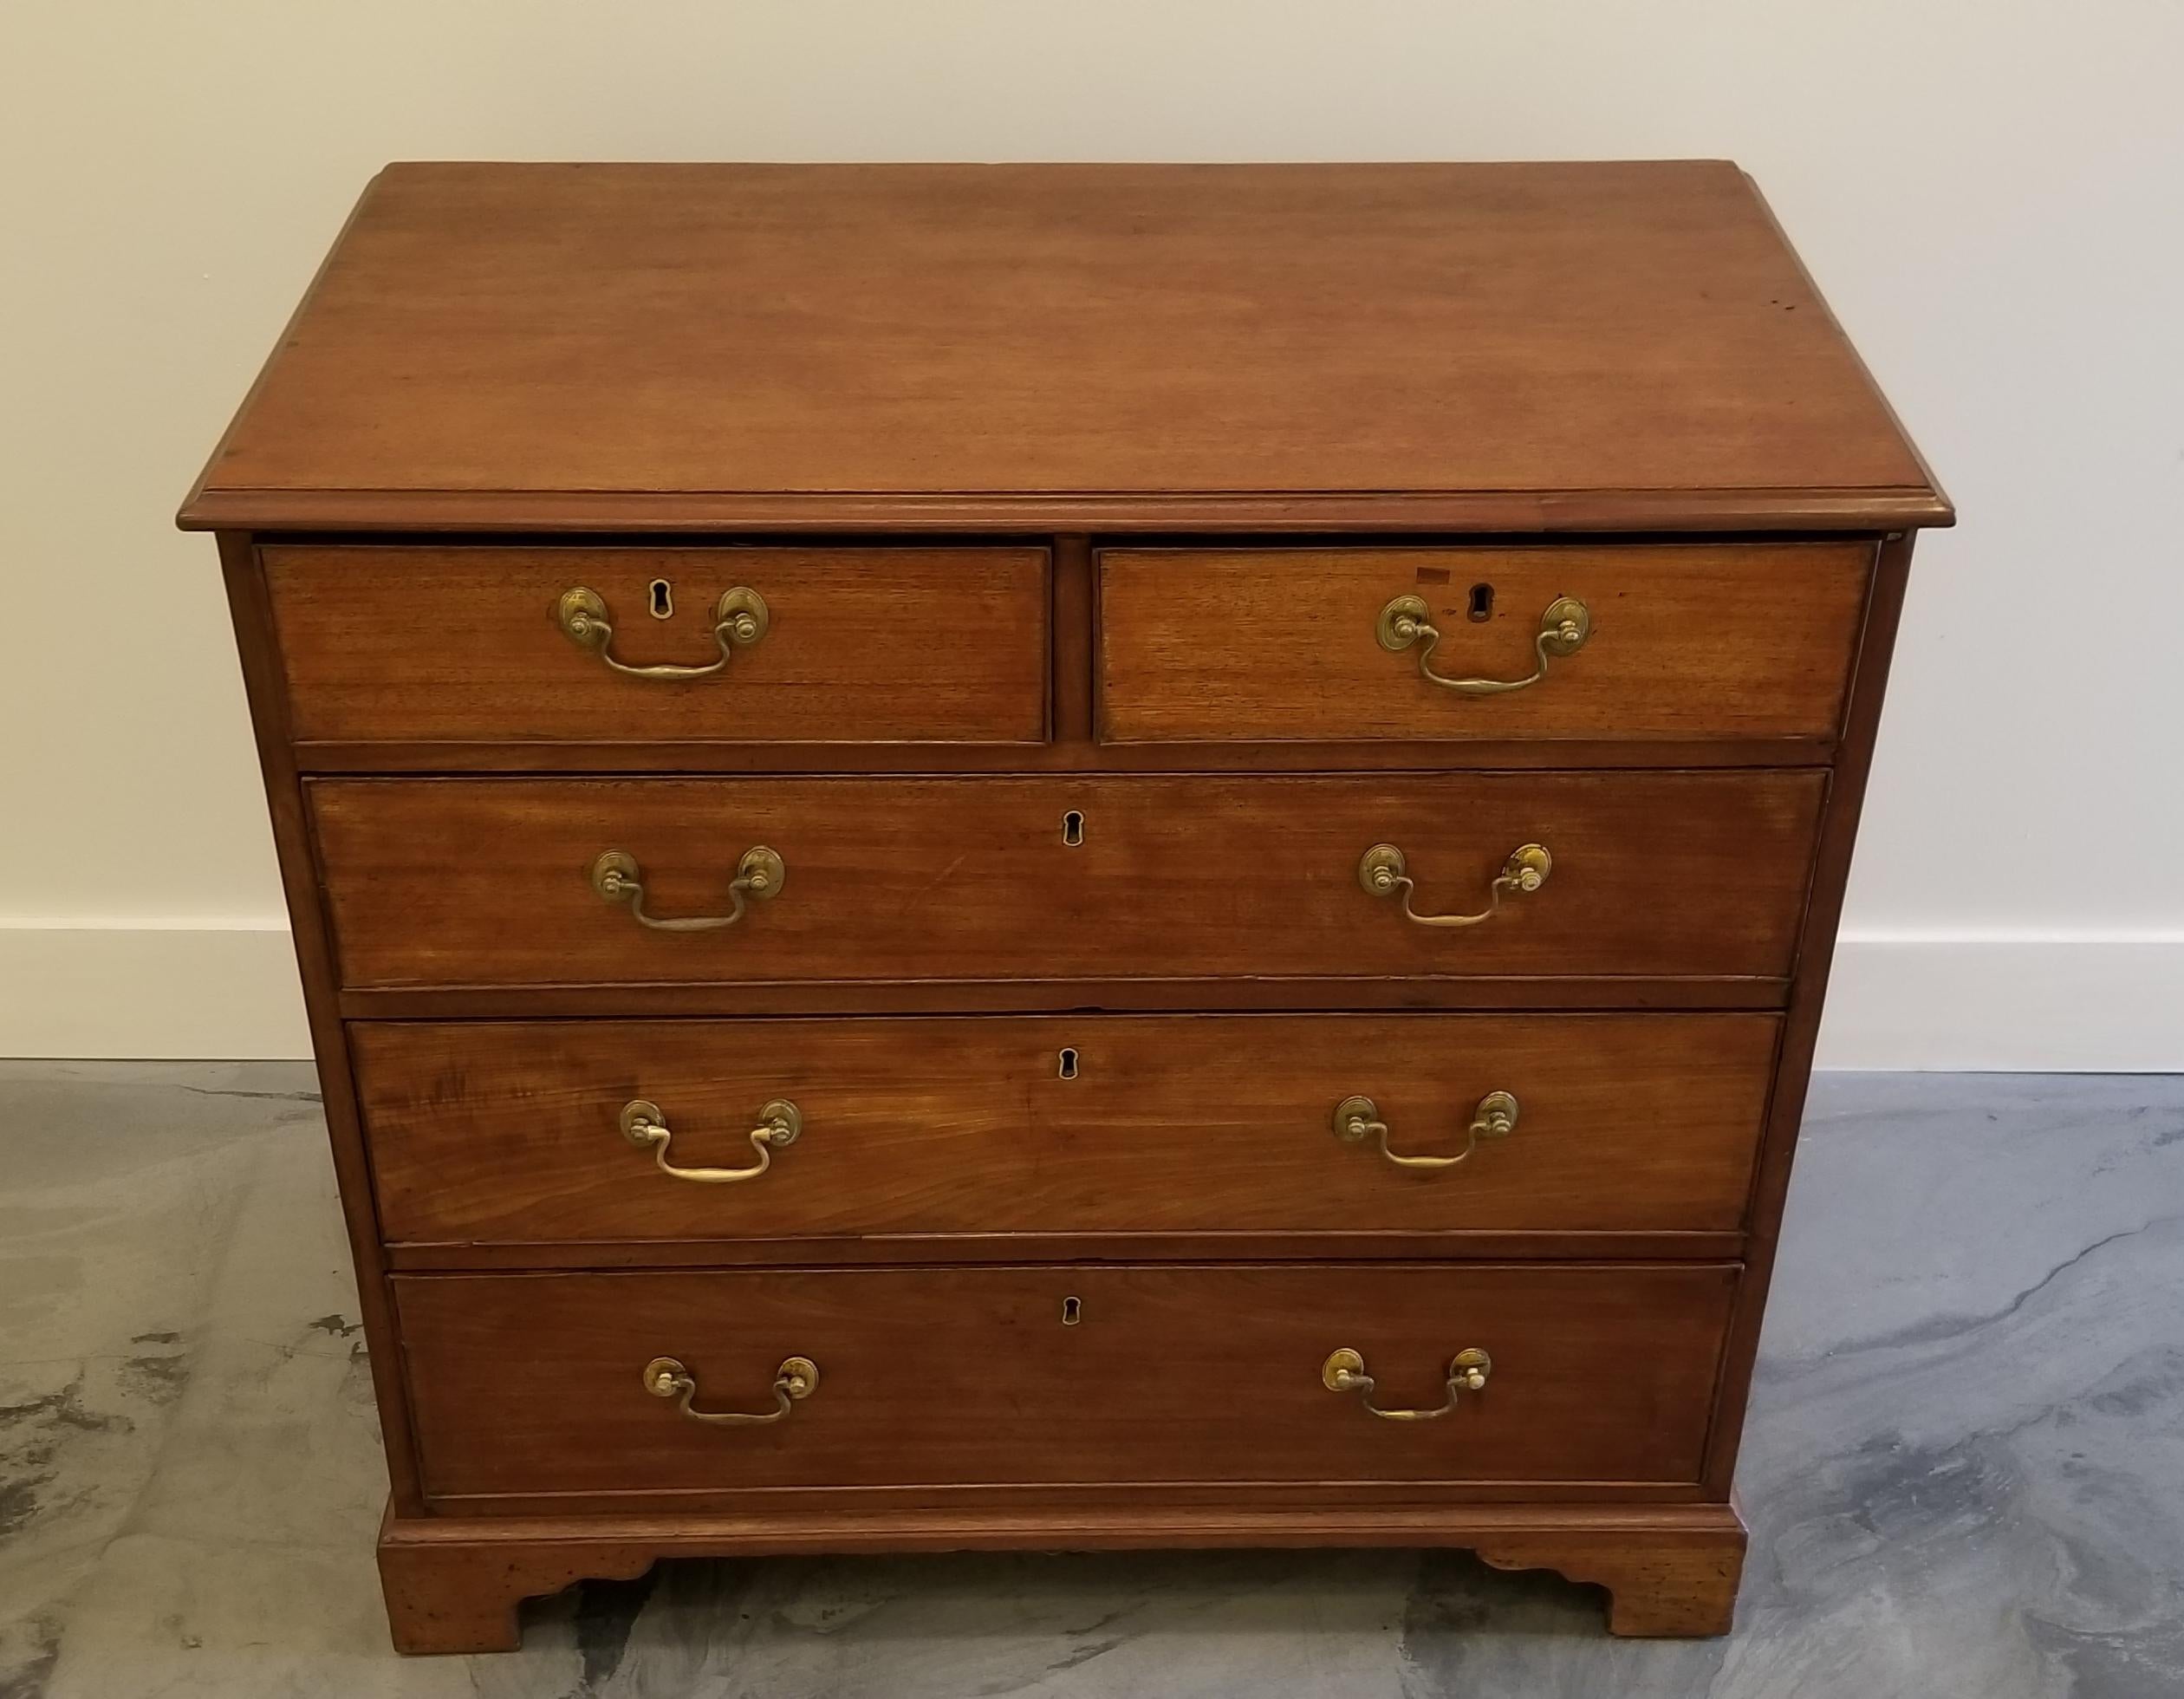 An 18th century Georgian dresser with period pulls. Crafted in solid mahogany and solid oak. England, circa. 1790. 